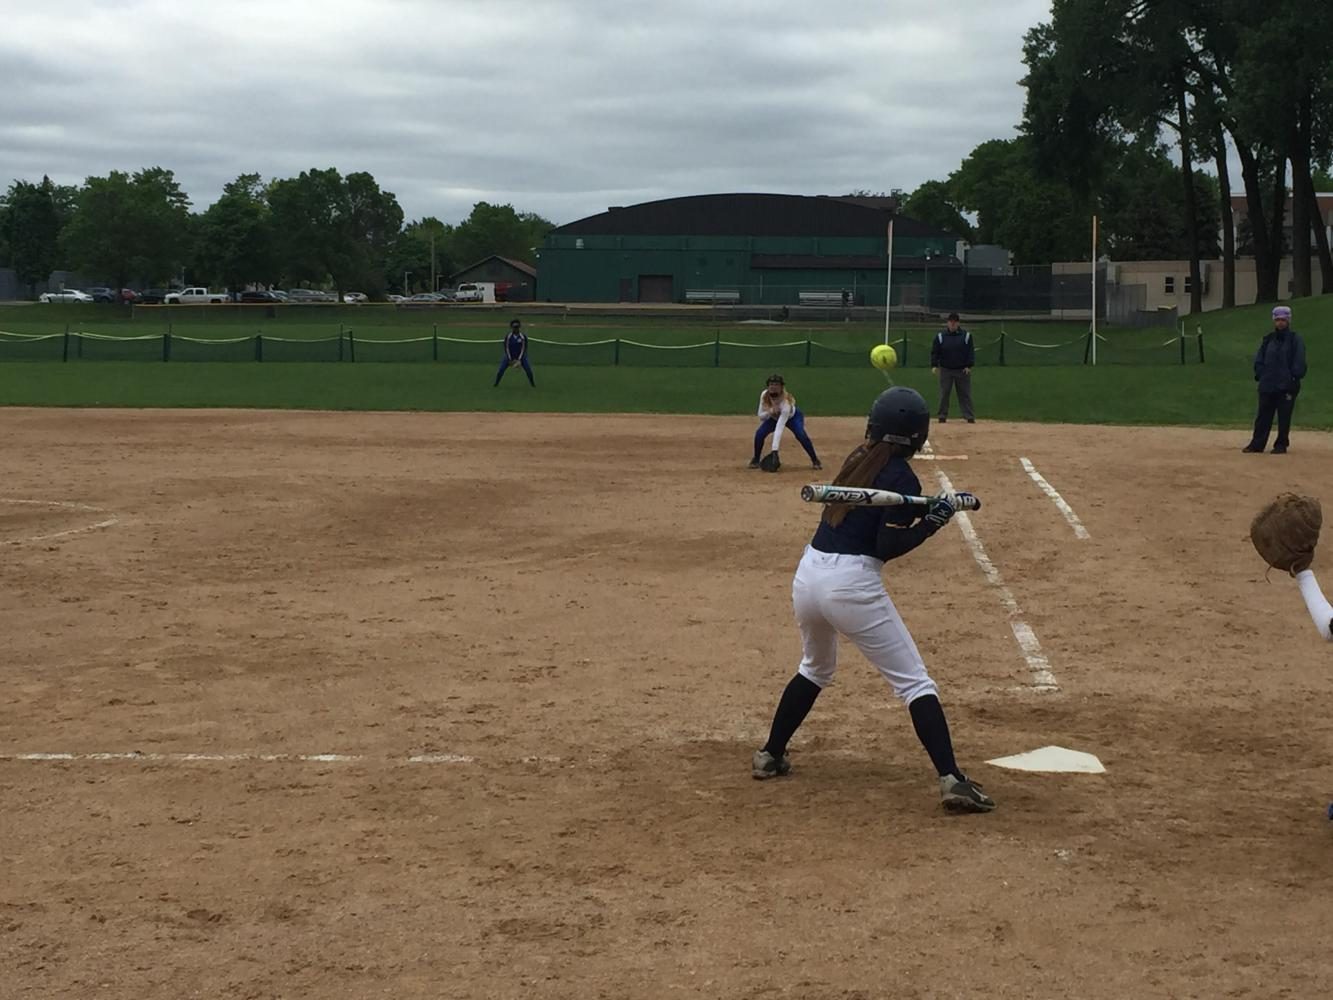 Senior Barbara Bathke gets a hit in the bottom of the third.